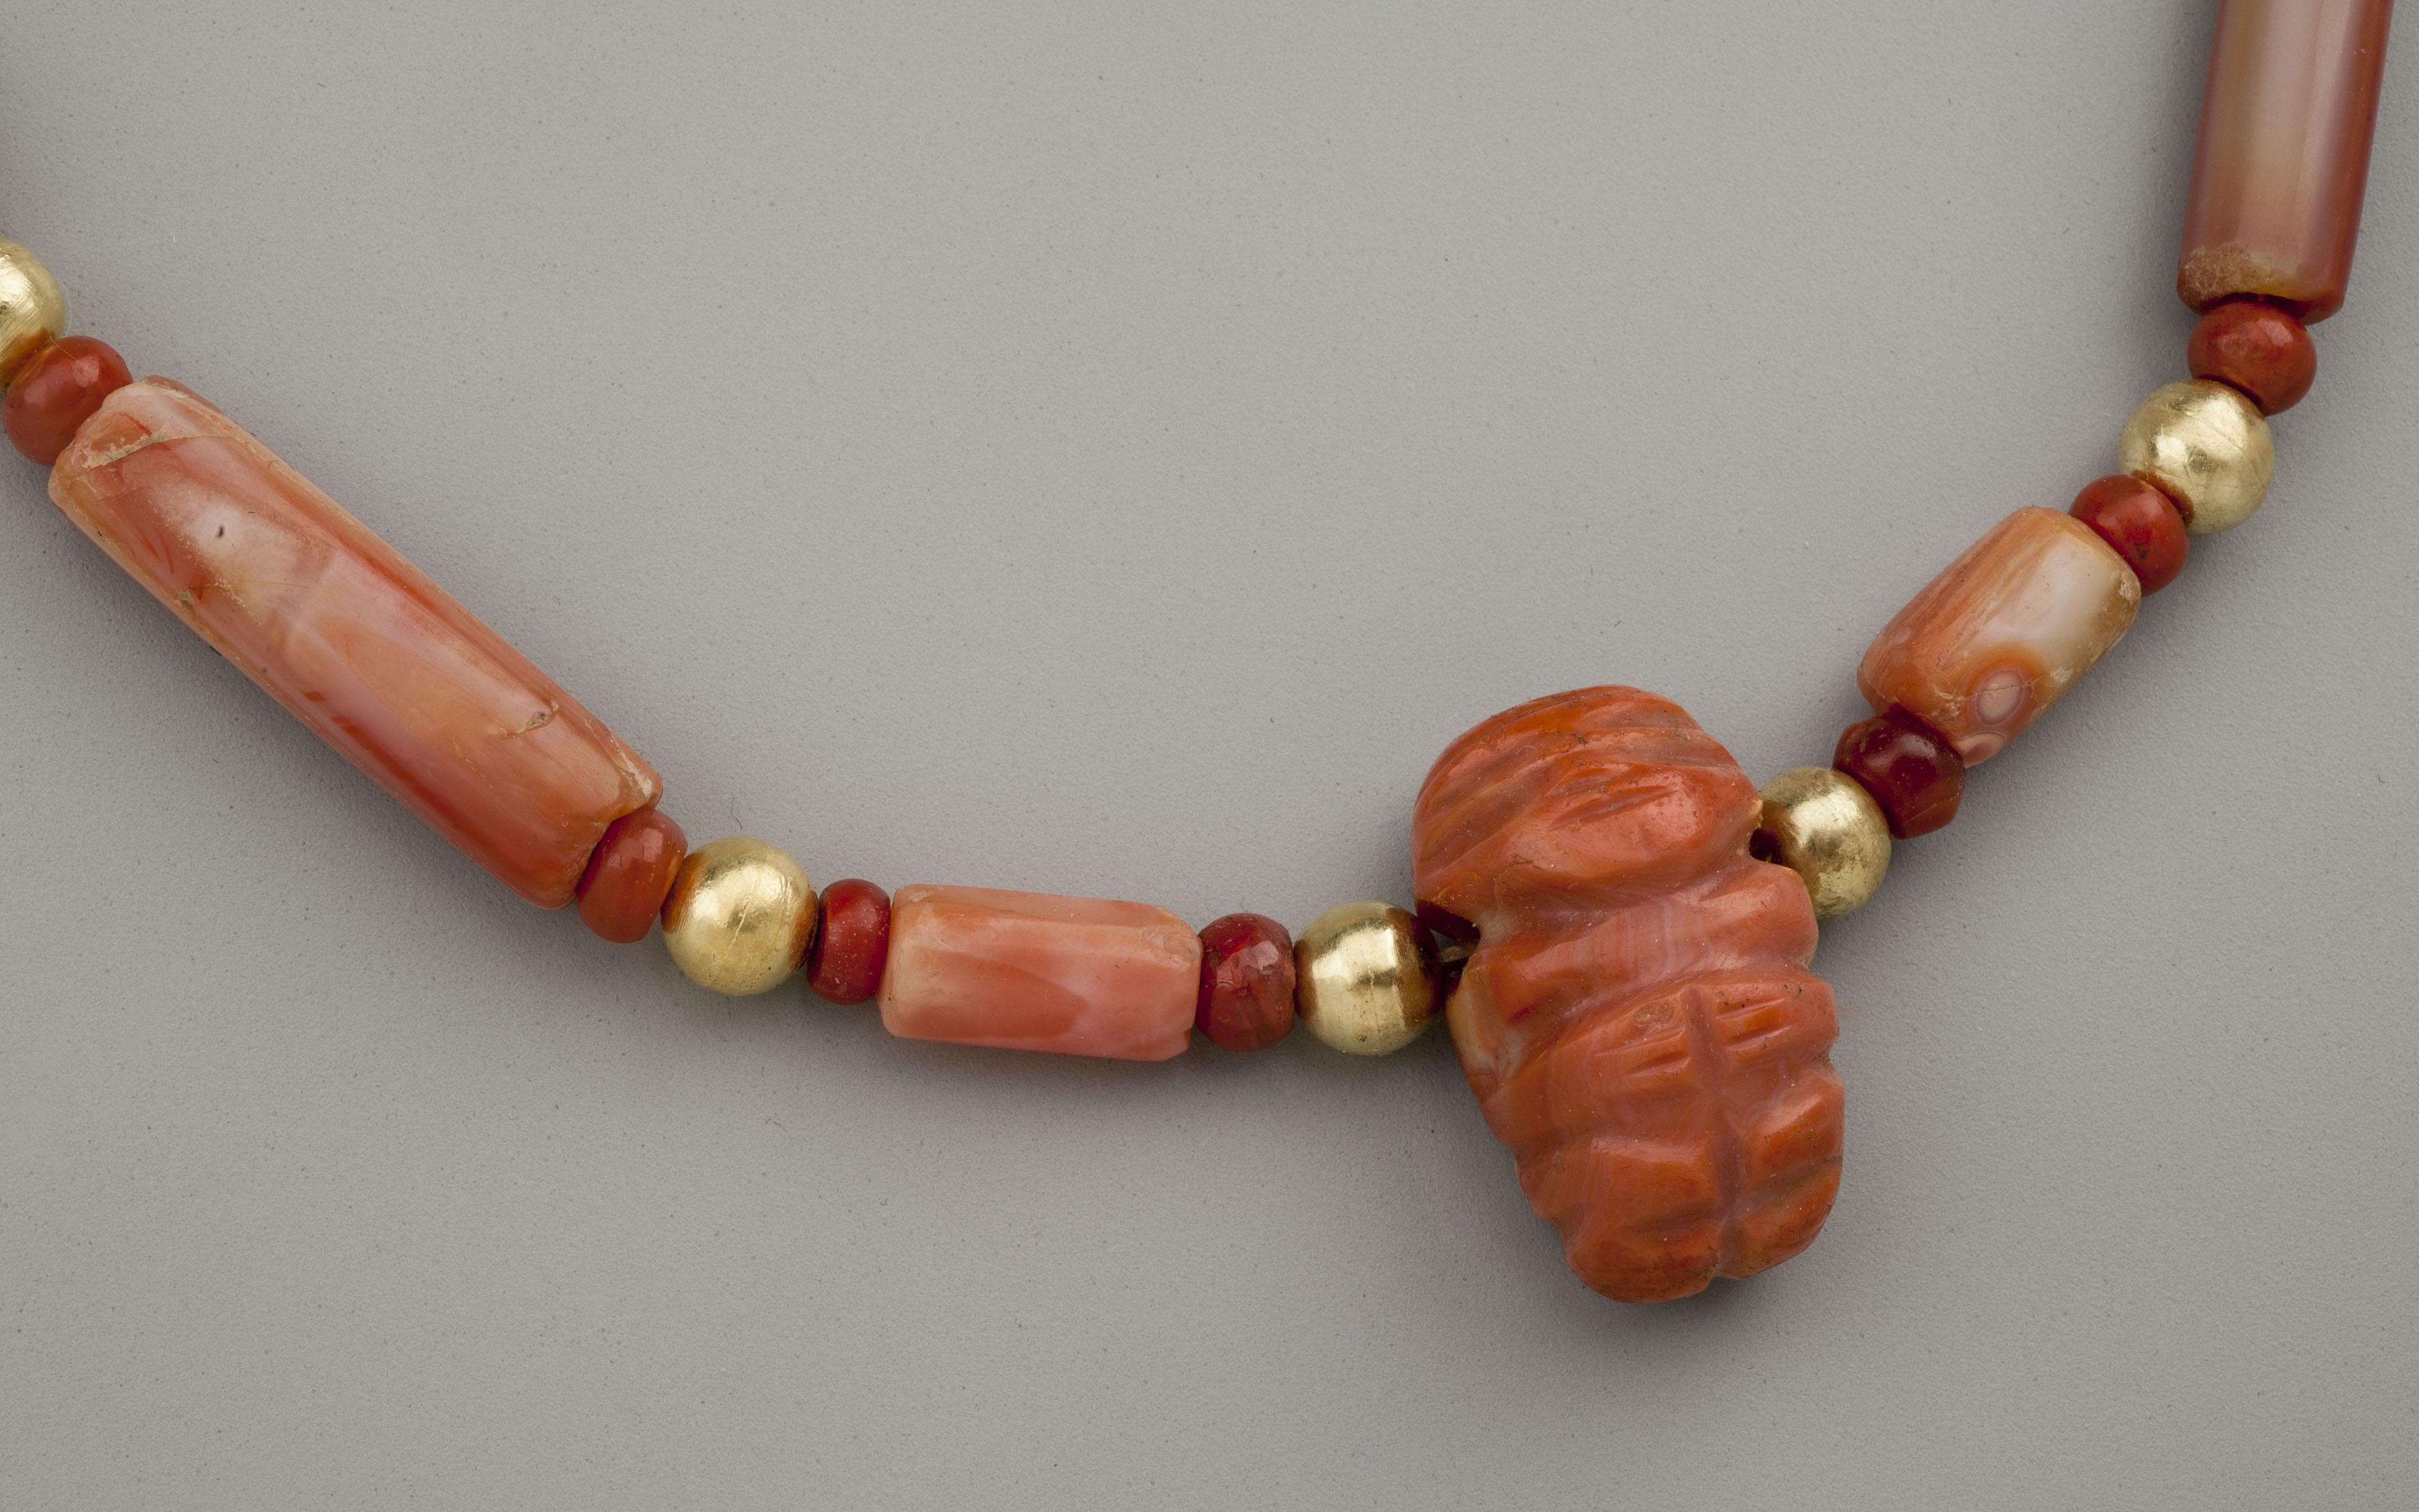 Thirty-six carnelian beads, twelve of cylindrical form and twenty-four round beads and twelve round gold beads and a carnelian effigy of a man (presumably a chief) pendant. The stone pieces are said to be from the Tairona people of Colombia, South